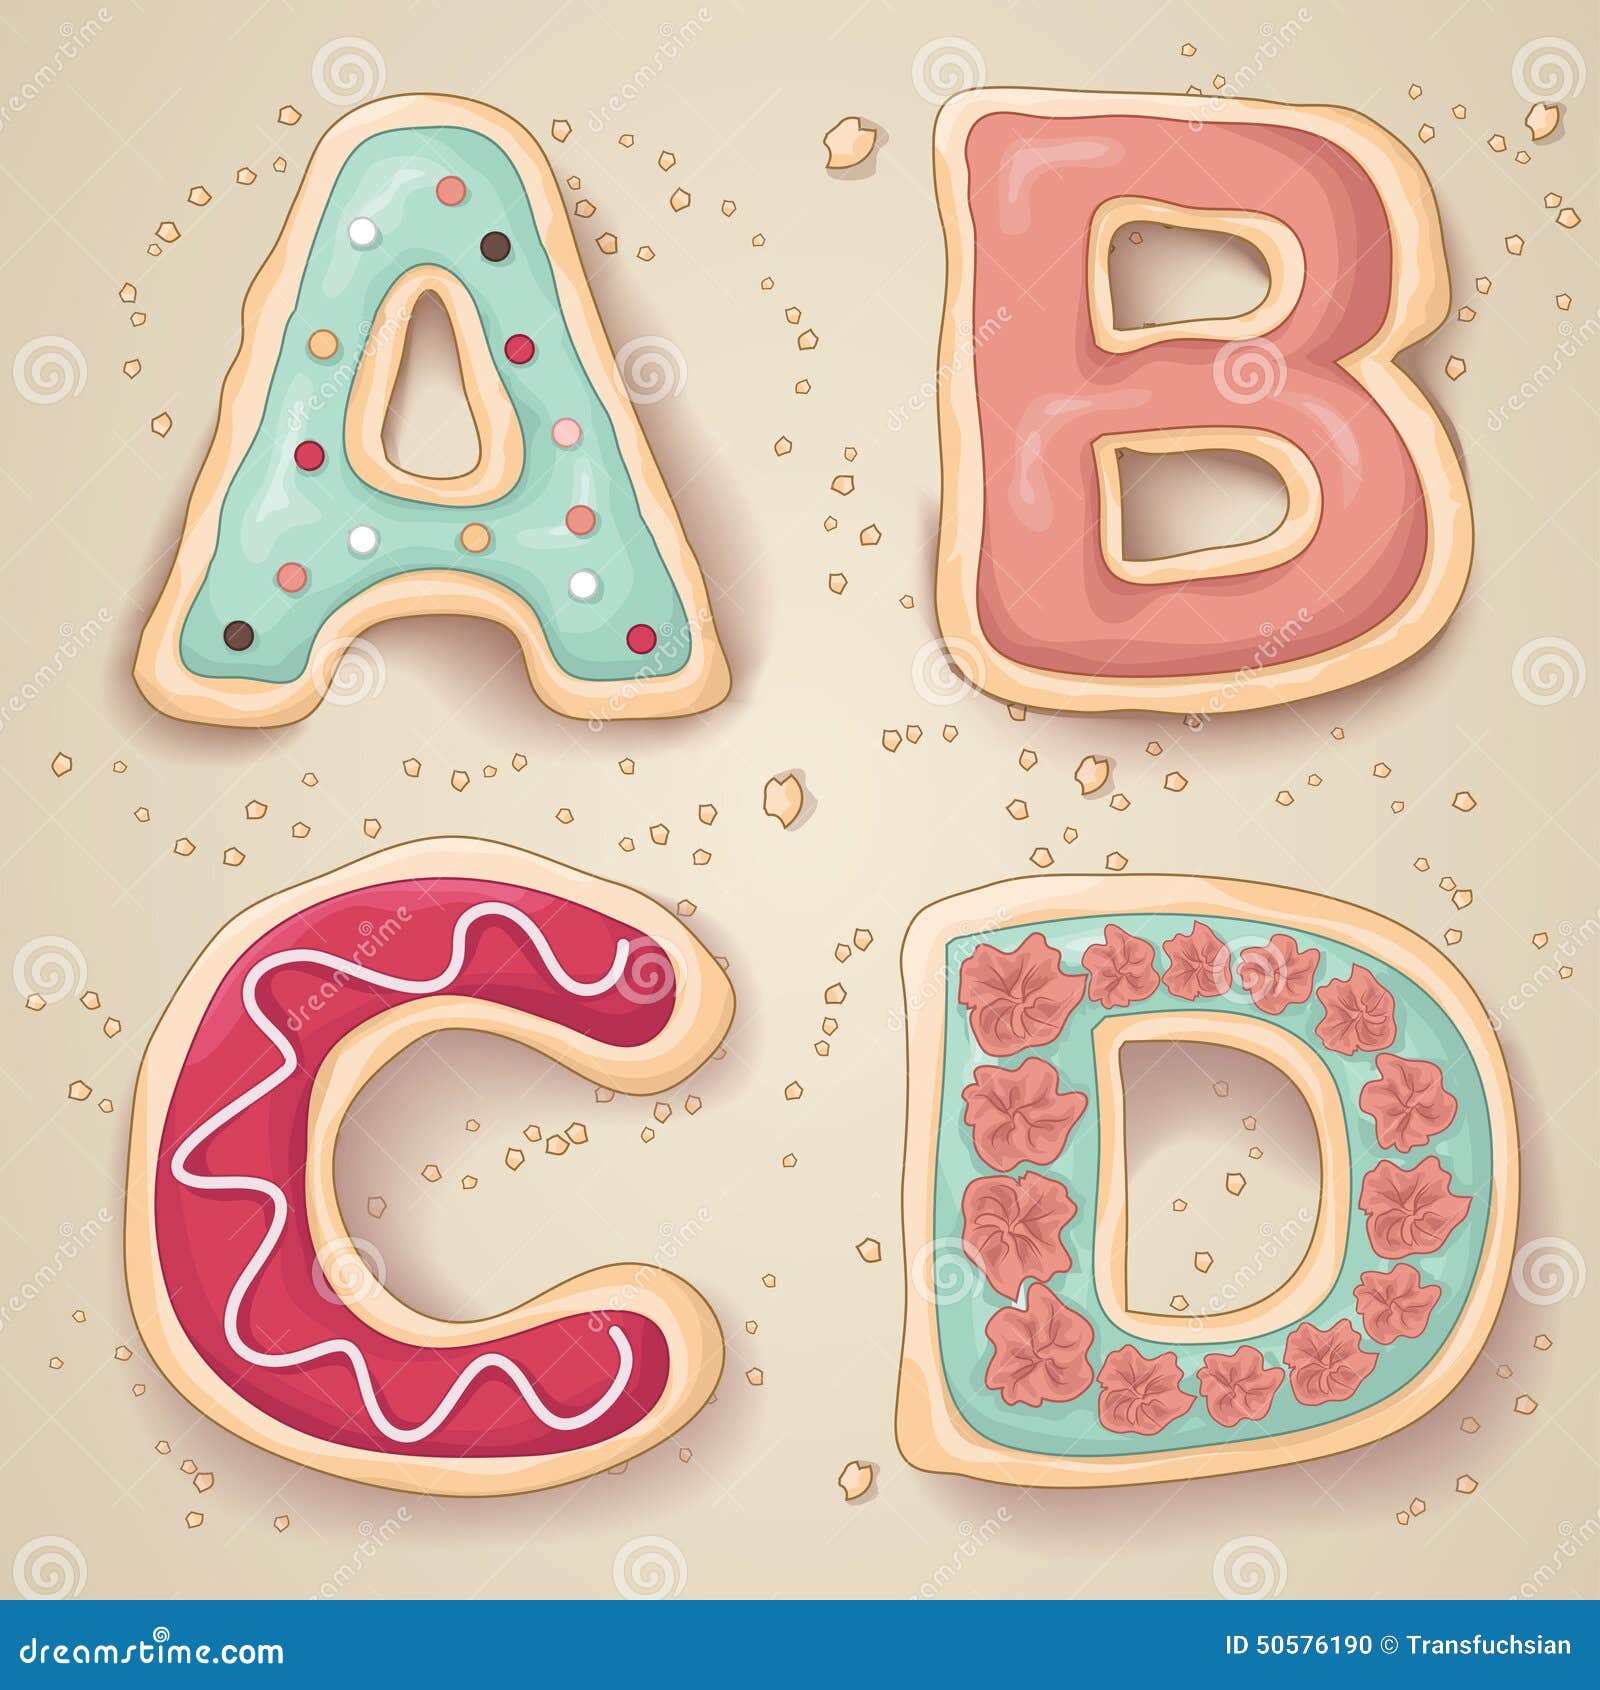 Edible Letters Stock Illustrations – 338 Edible Letters Stock  Illustrations, Vectors & Clipart - Dreamstime